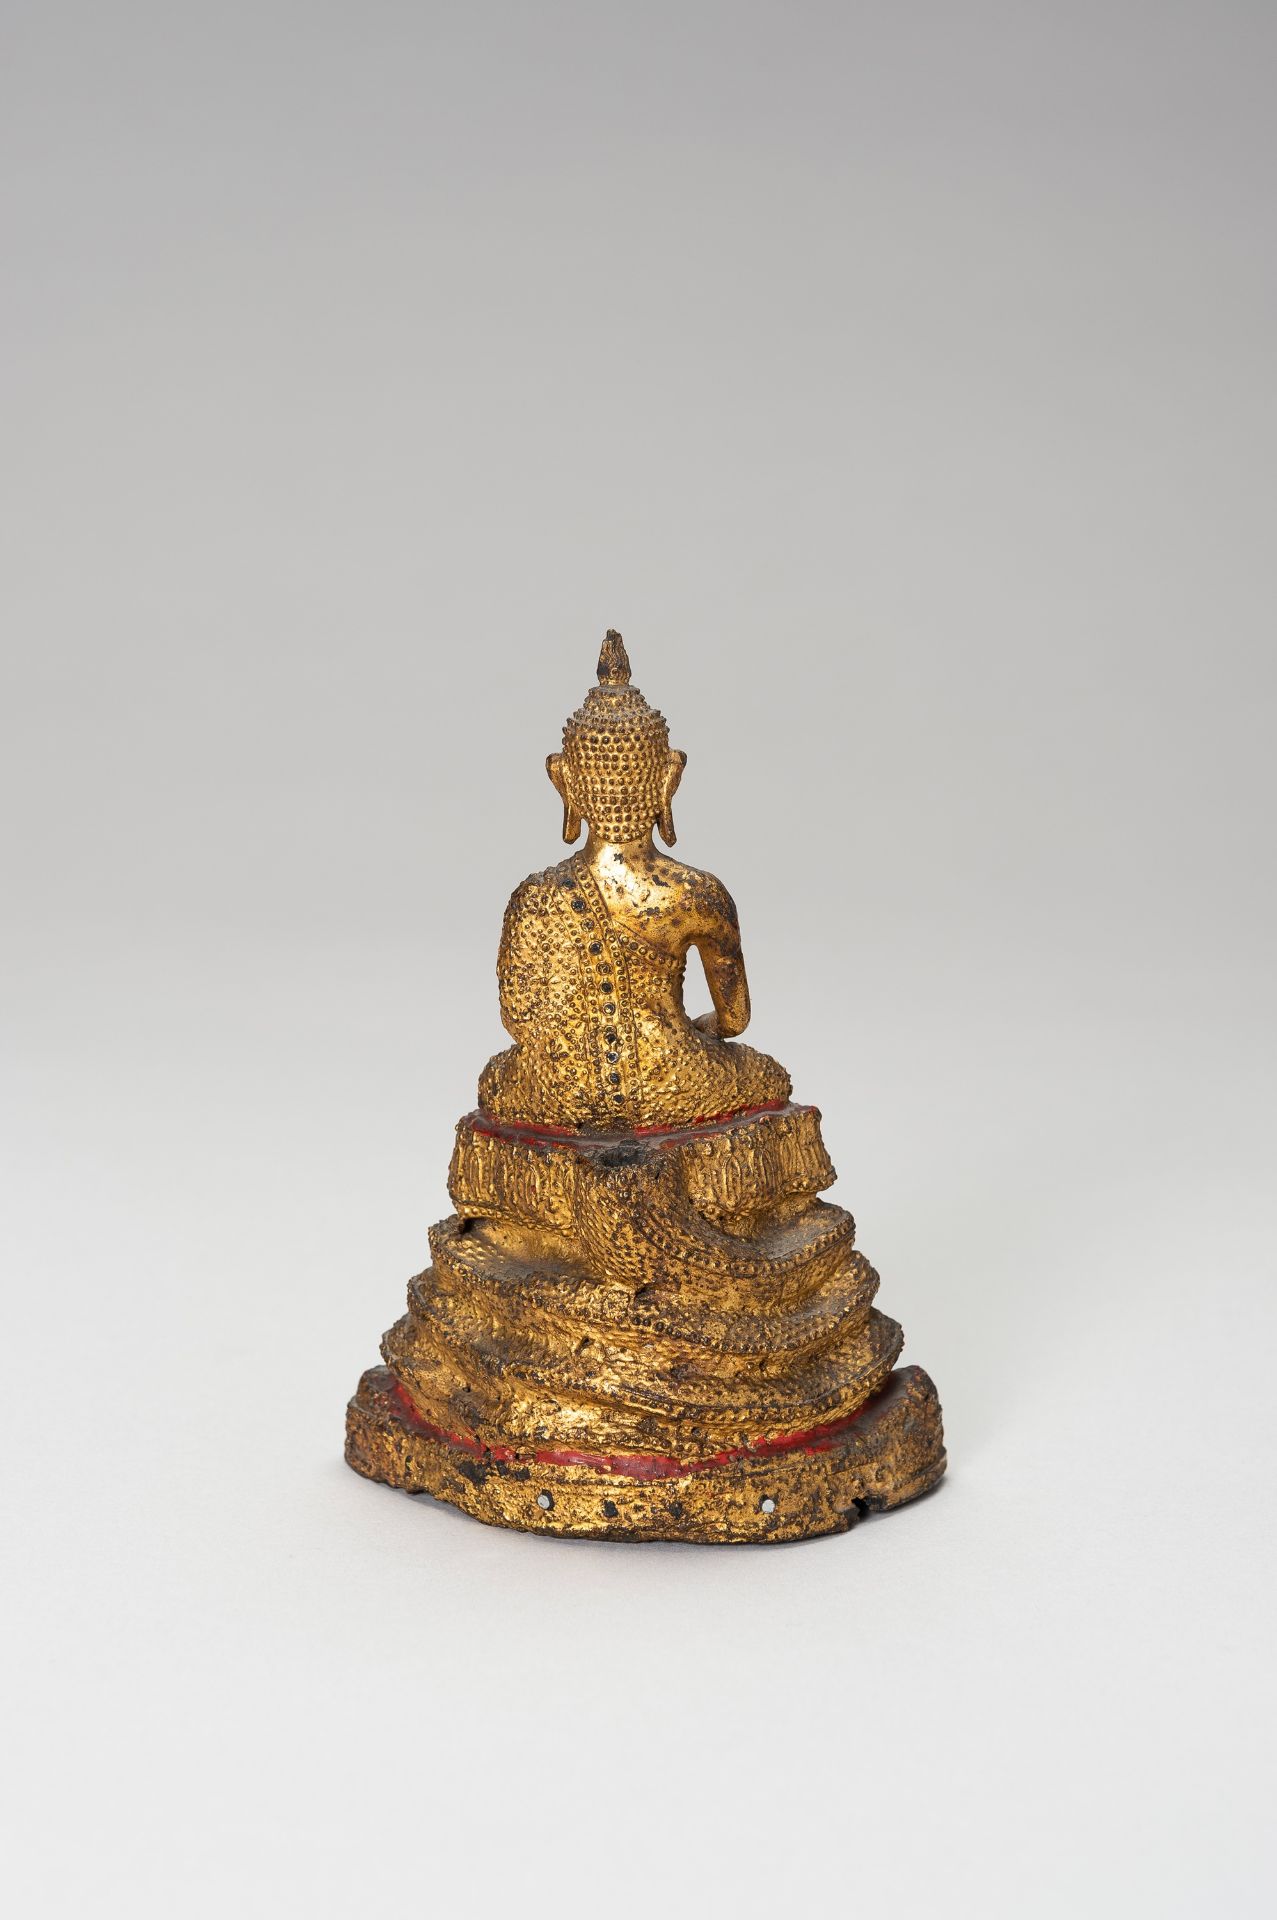 A SMALL LACQUER GILT BRONZE FIGURE OF A SEATED BUDDHA - Image 8 of 9